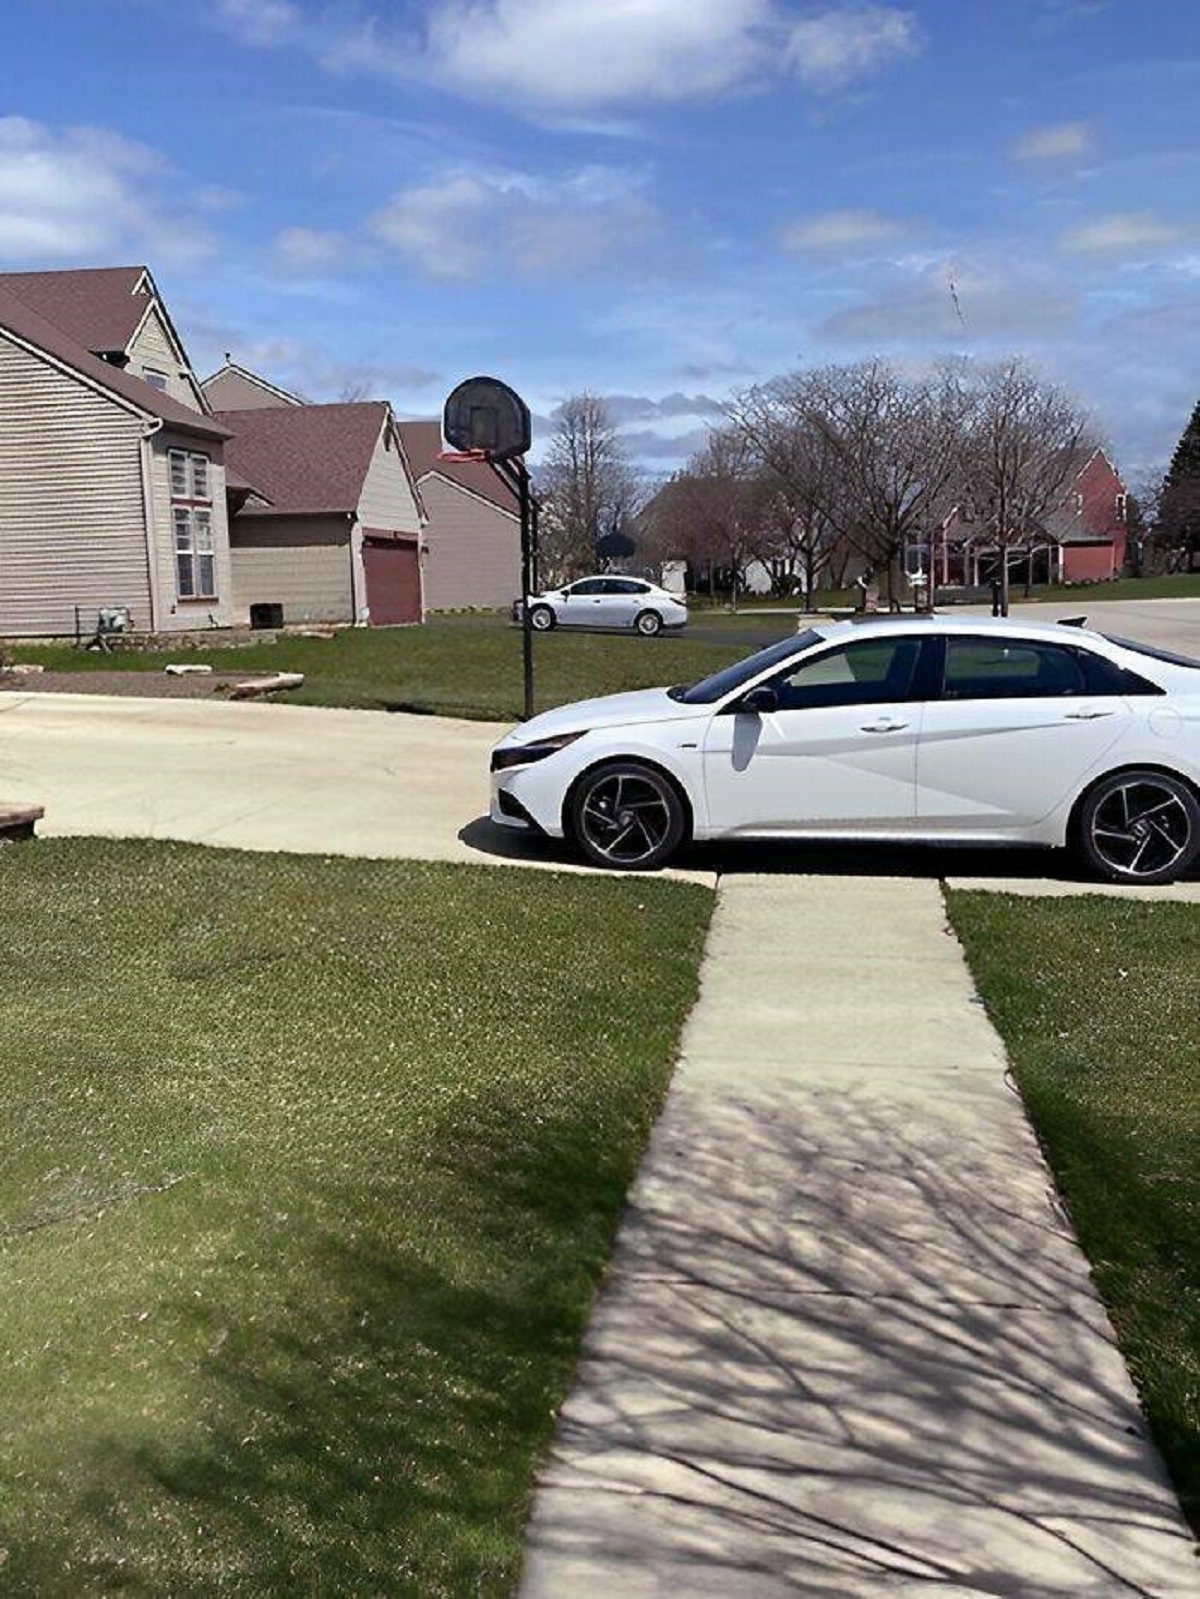 "This Person Has A Three-Car Garage And A Large Driveway But Parks On The Sidewalk"